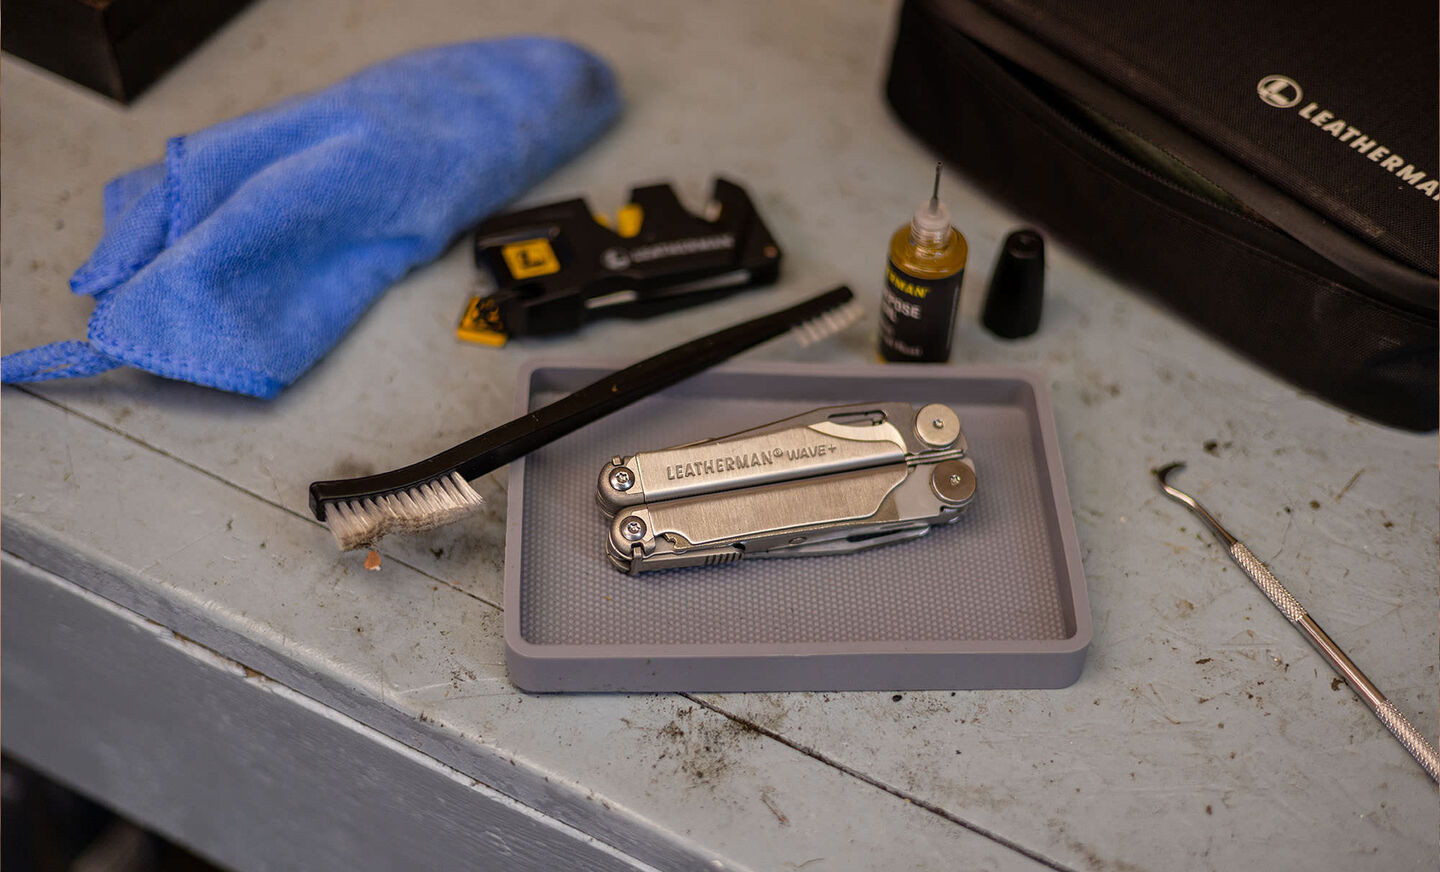 Leatherman maintenance kit with a Wave